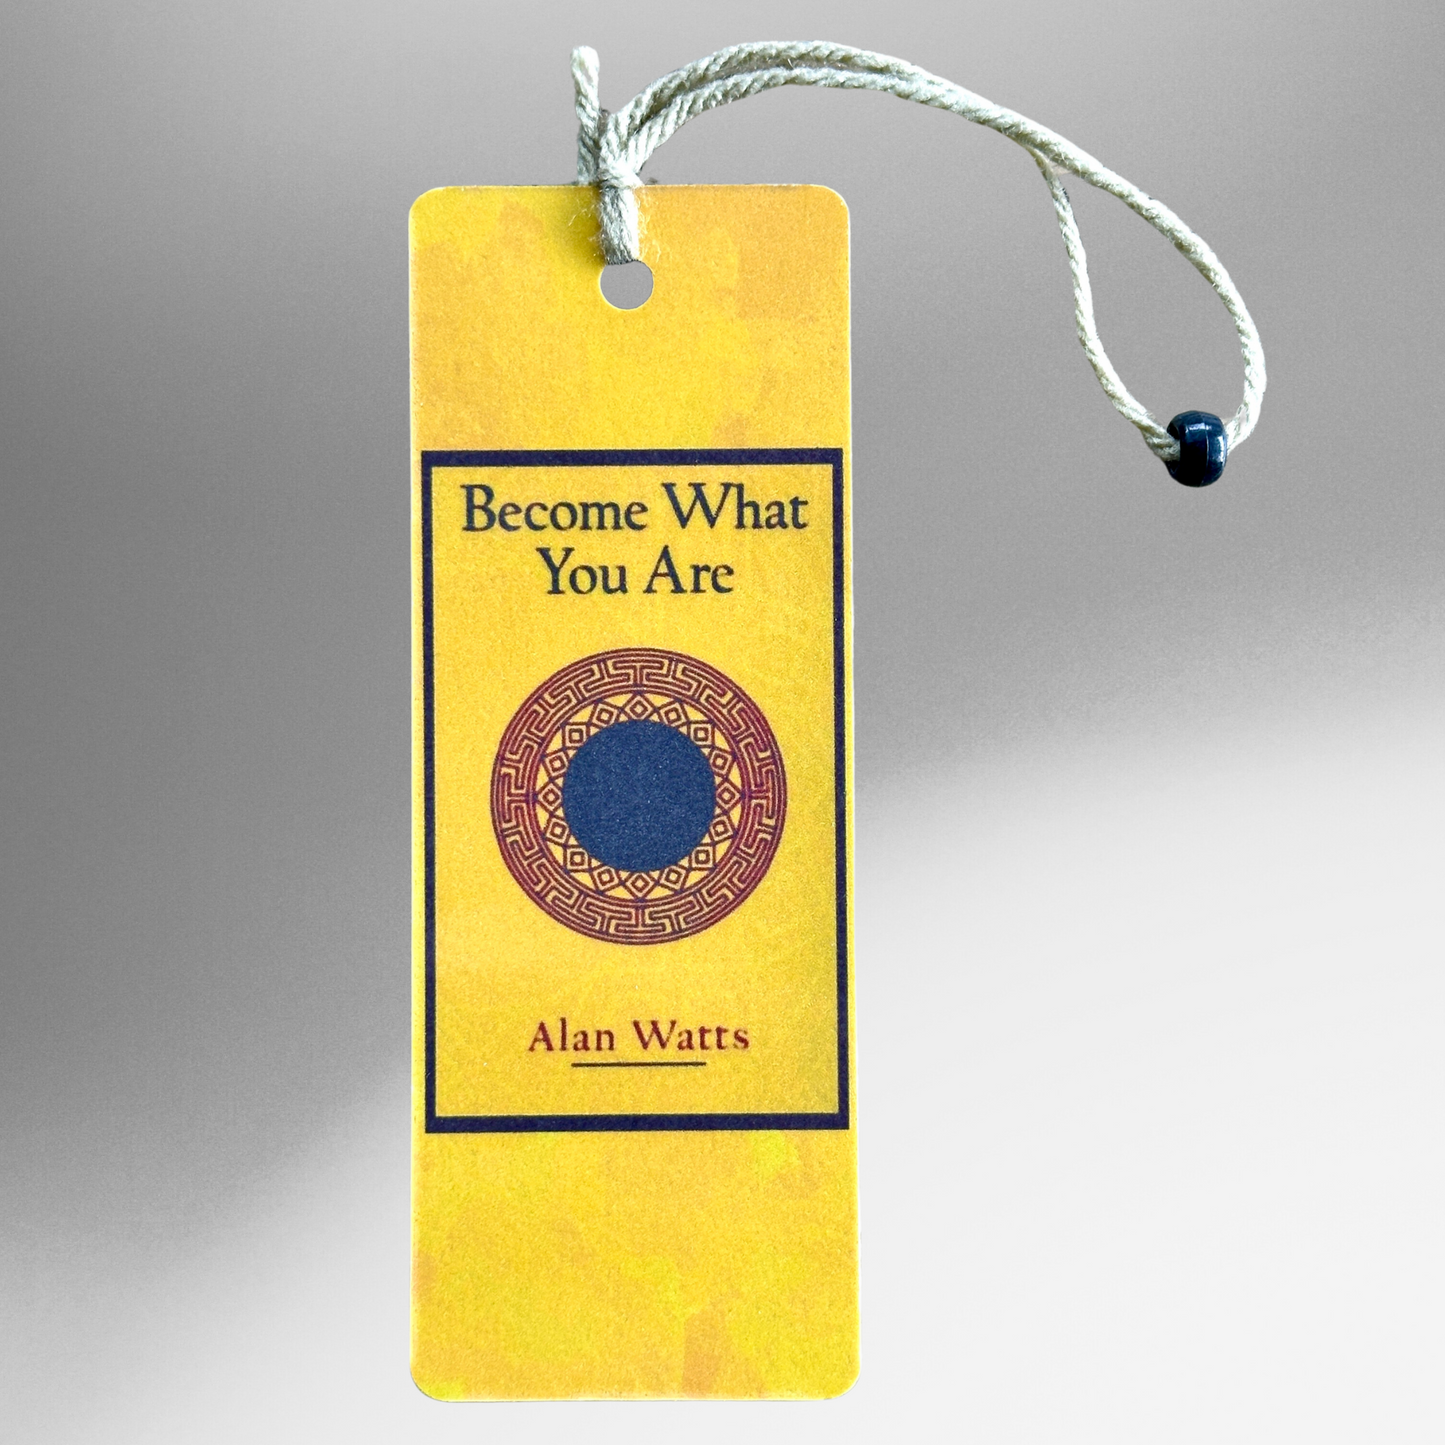 Alan Watts 'Become What You Are' Bookmark